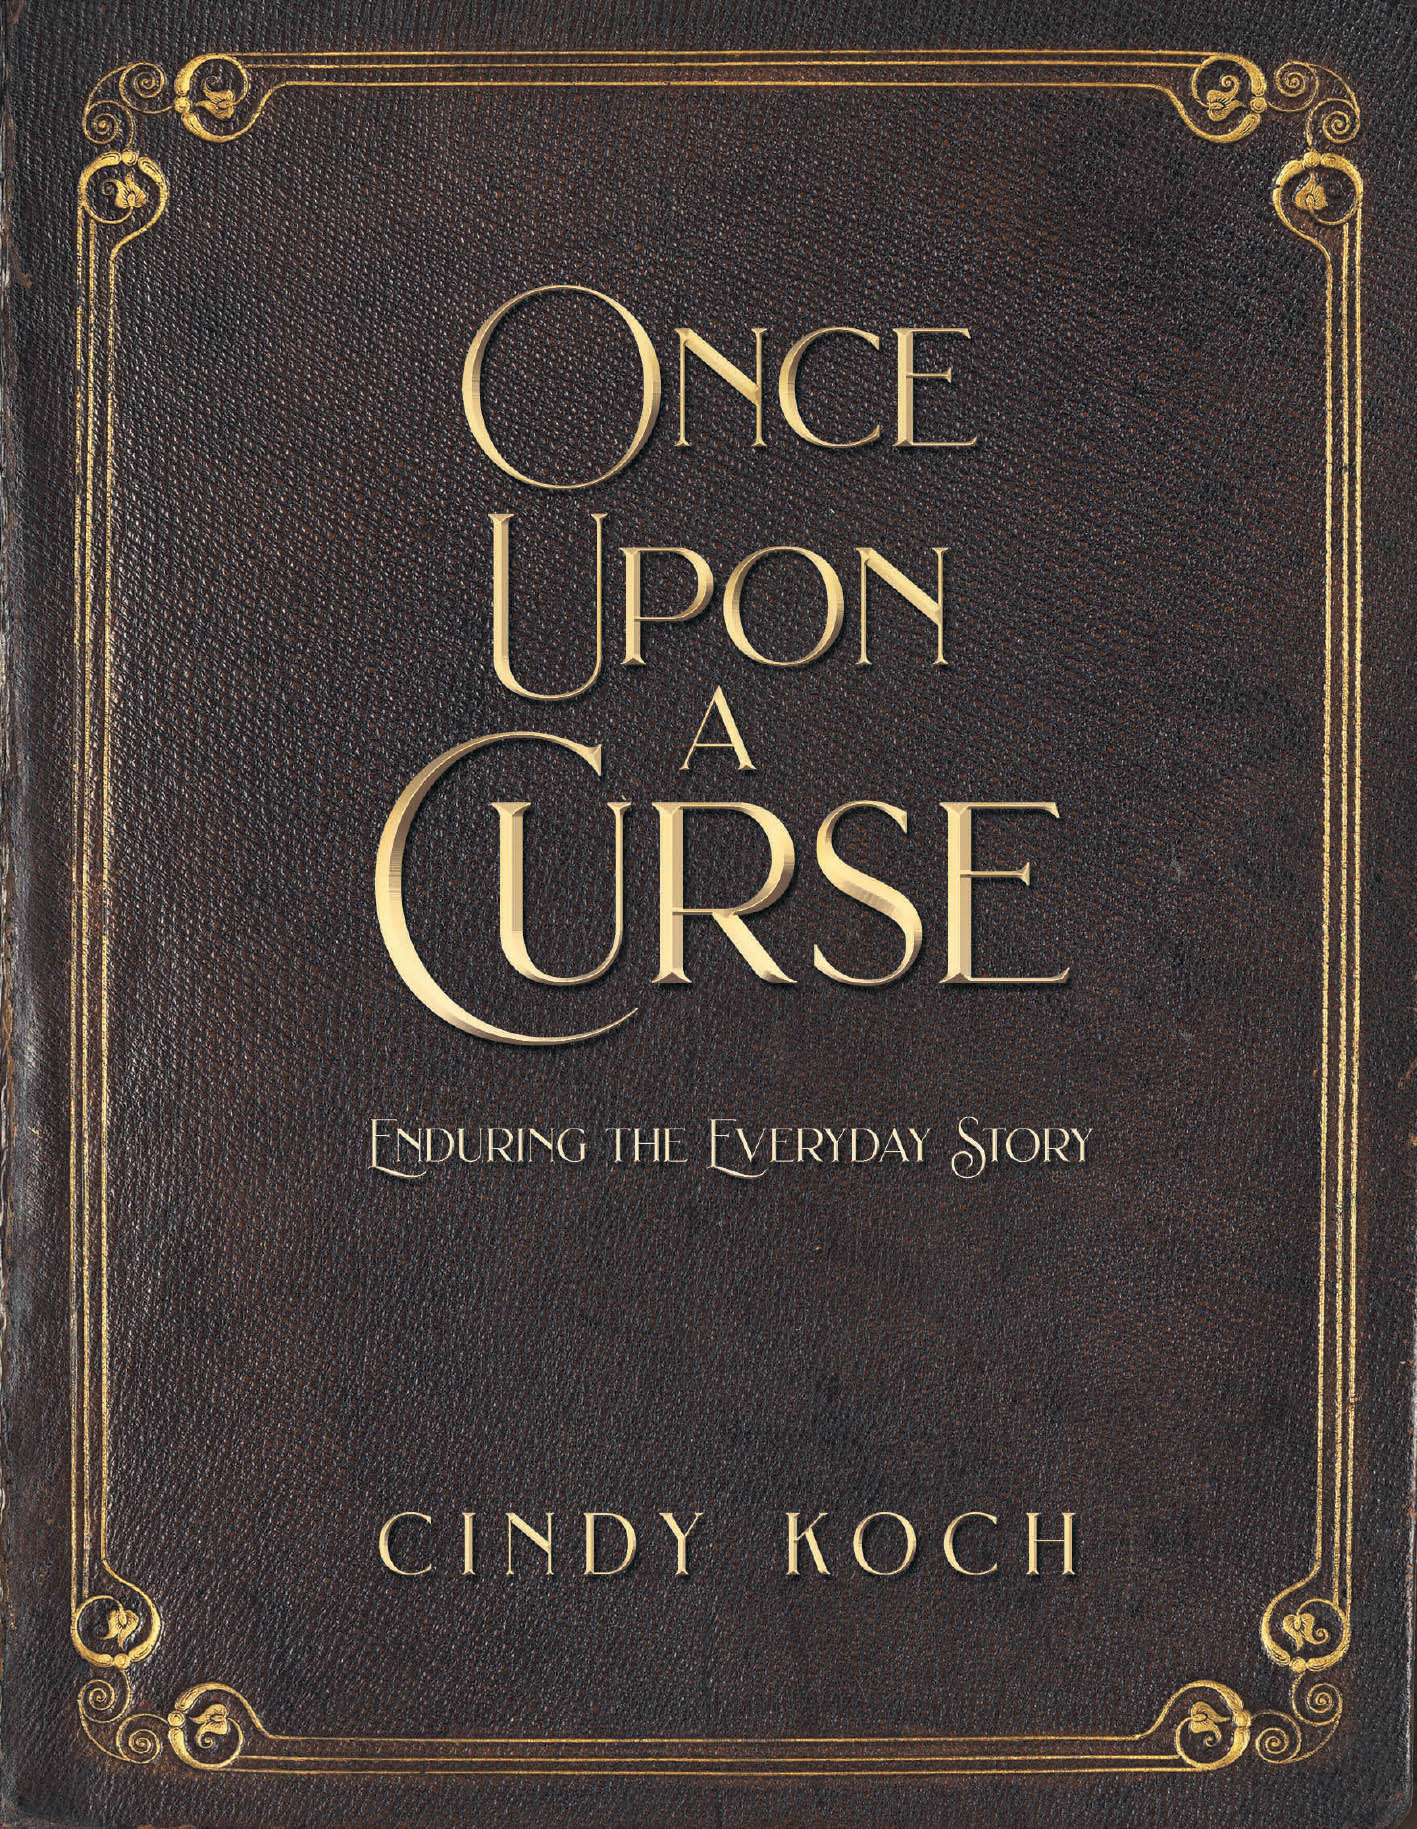 Cindy Koch’s Newly Released "Once Upon a Curse: Enduring the Everyday Story" is a Profound Exploration of Faith and Resilience